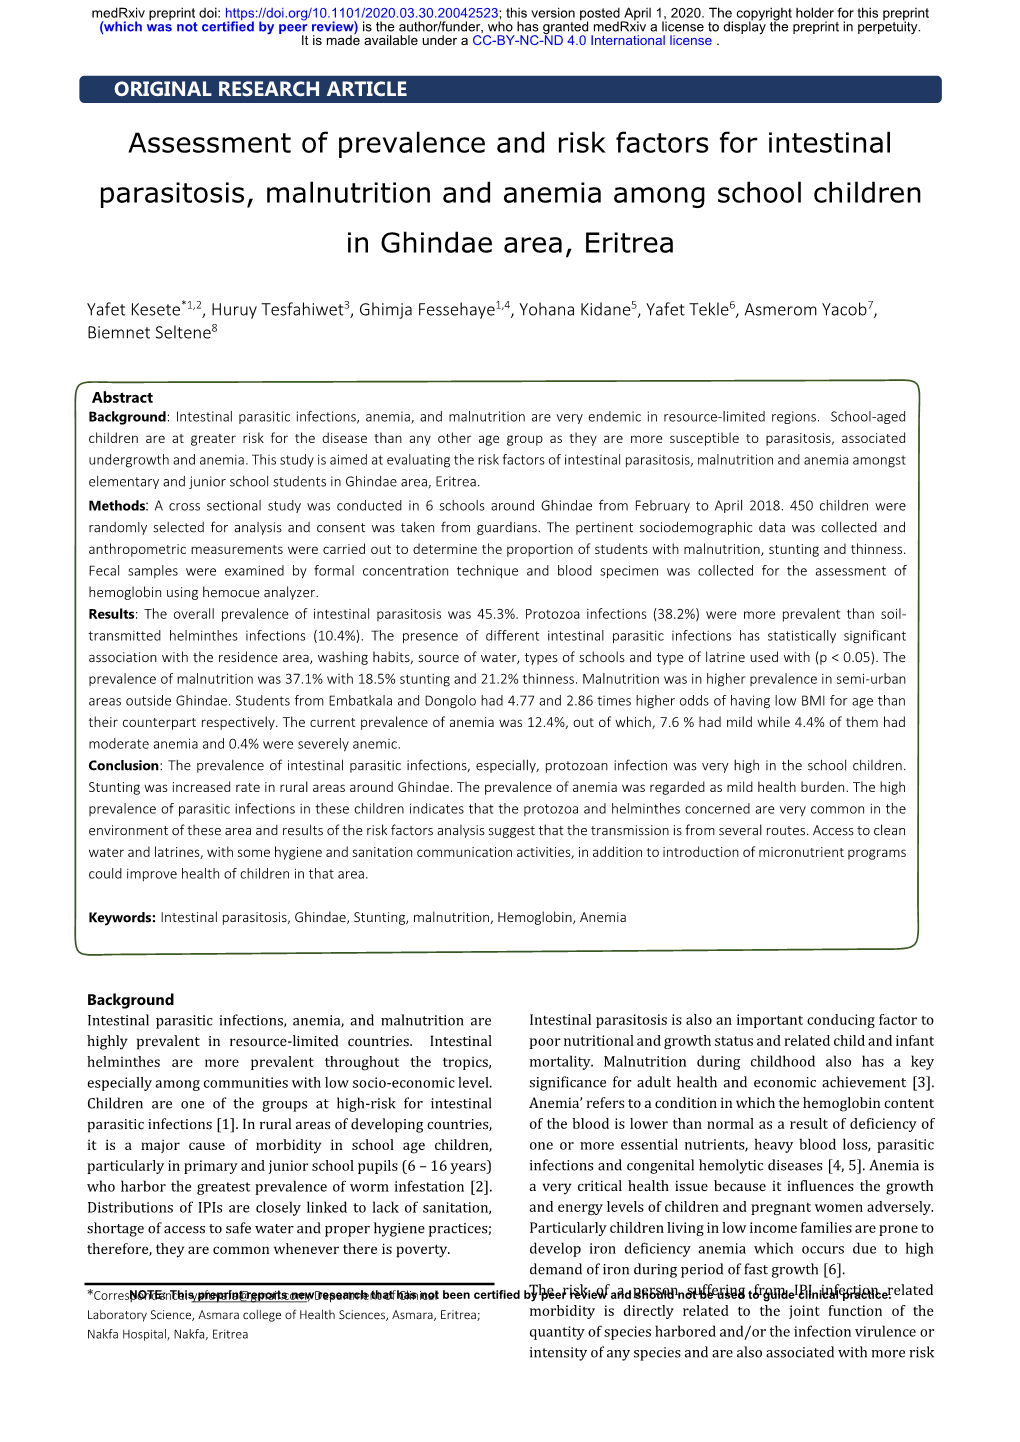 Assessment of Prevalence and Risk Factors for Intestinal Parasitosis, Malnutrition and Anemia Among School Children in Ghindae Area, Eritrea